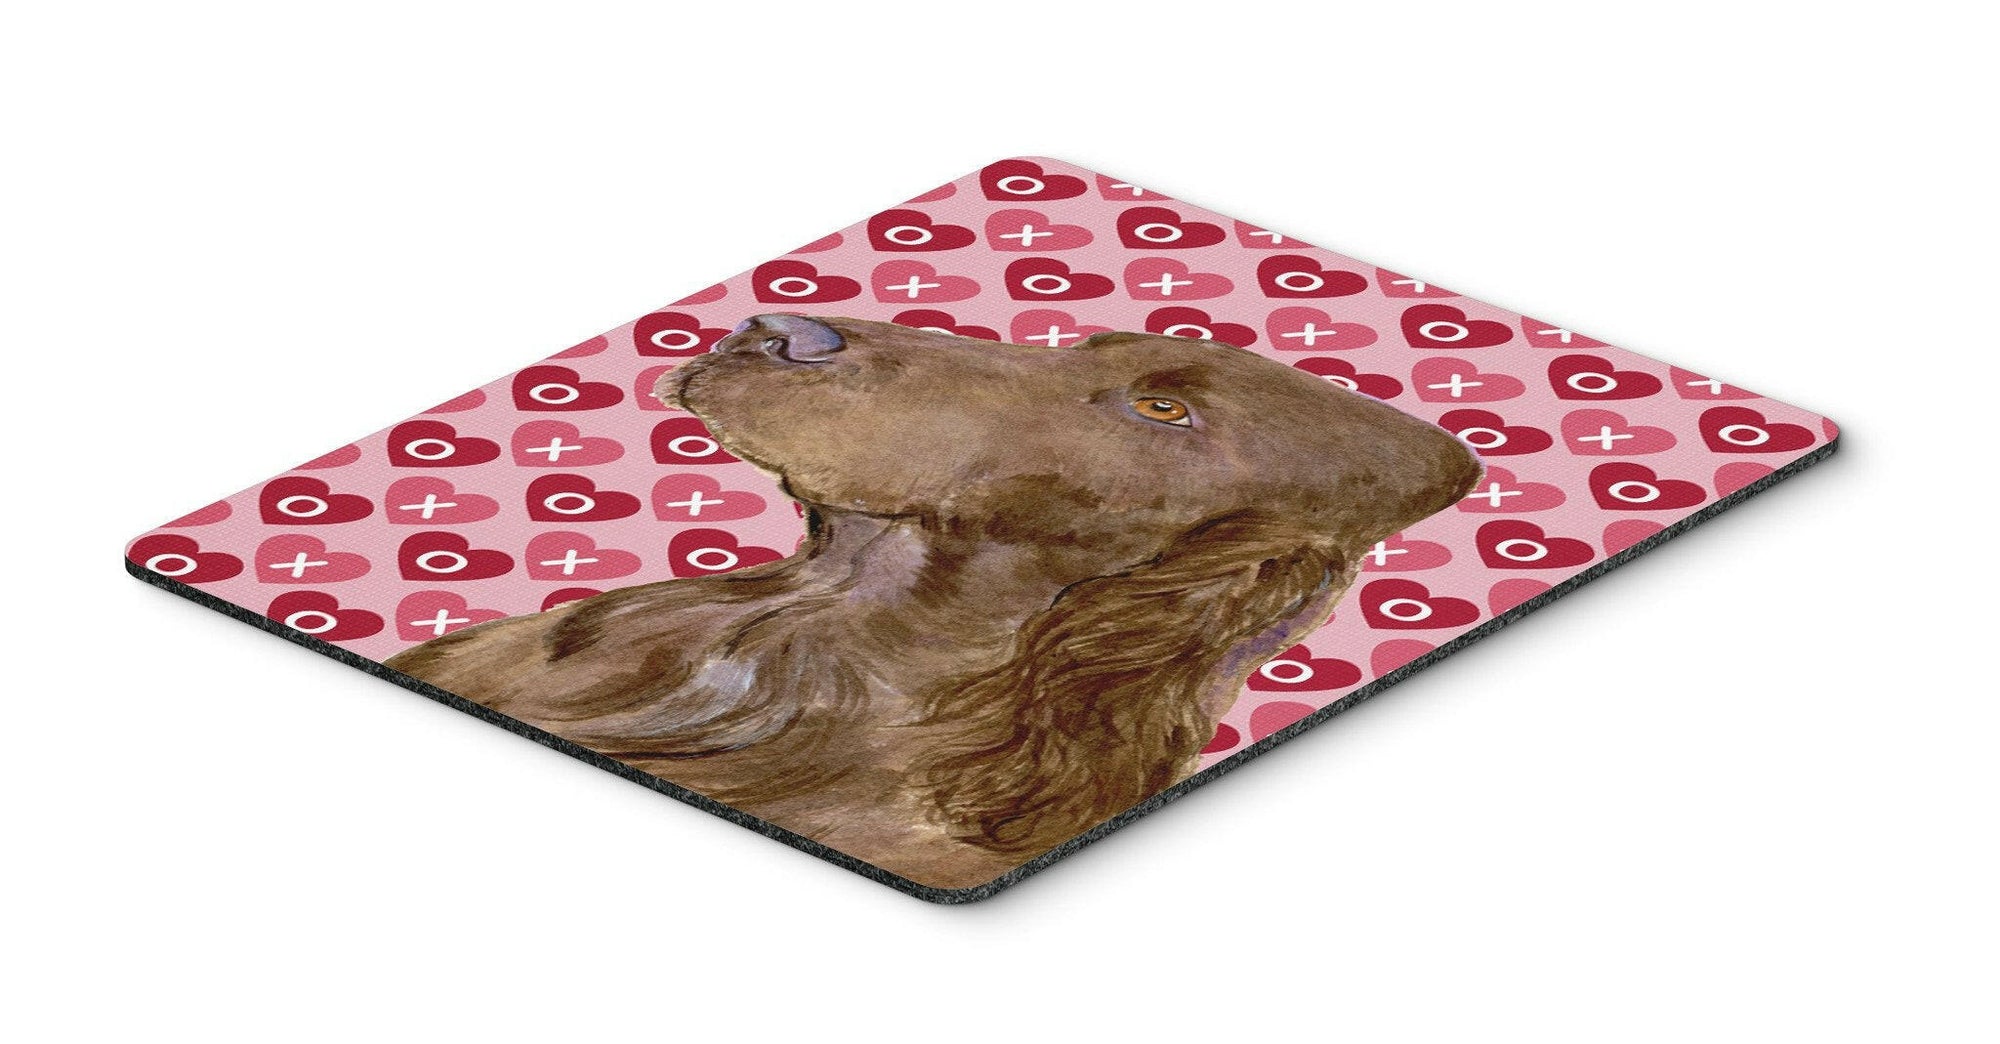 Field Spaniel Hearts Love and Valentine's Day Mouse Pad, Hot Pad or Trivet by Caroline's Treasures